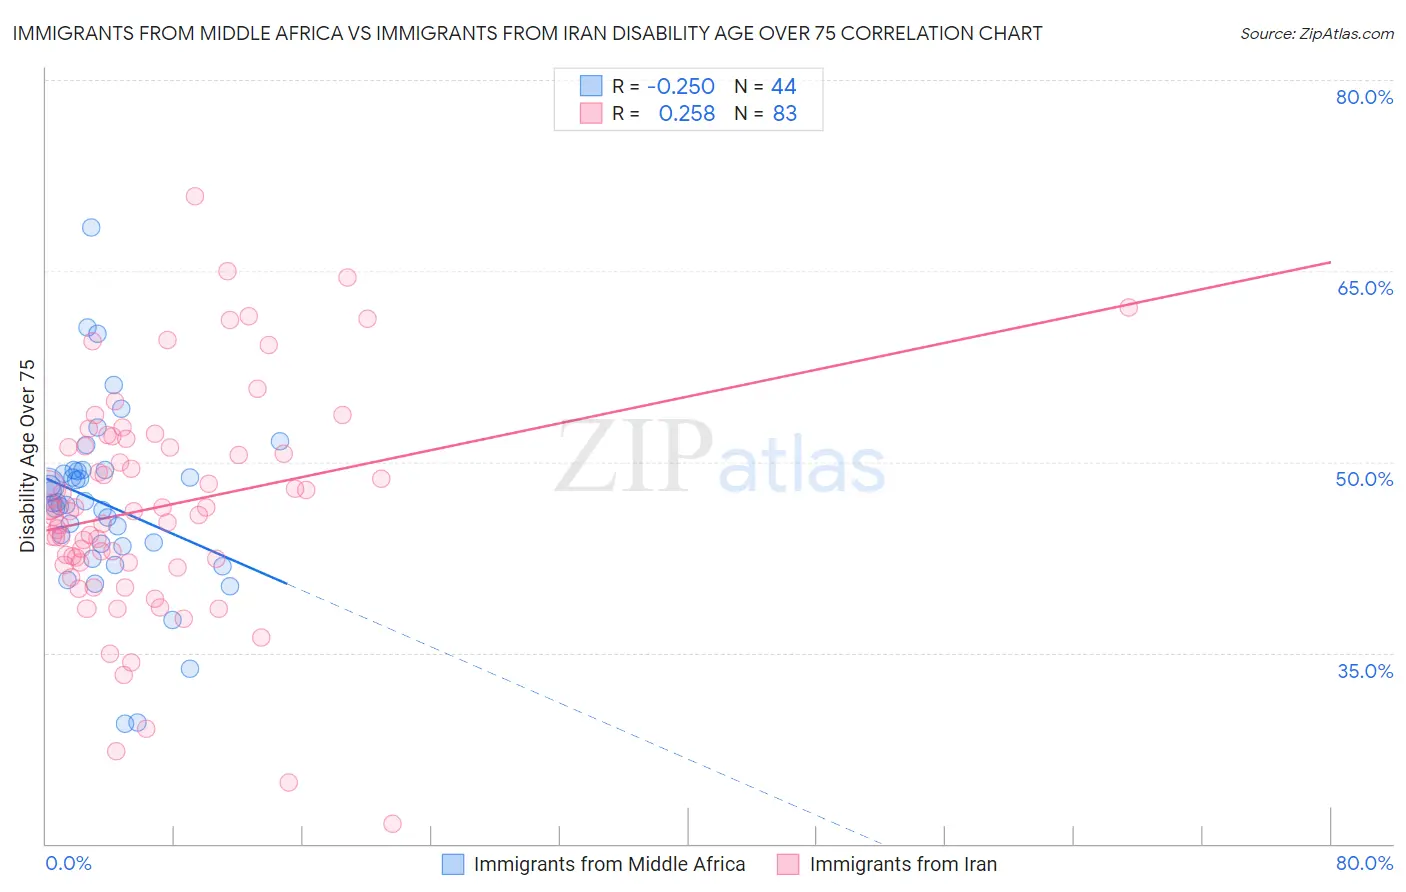 Immigrants from Middle Africa vs Immigrants from Iran Disability Age Over 75